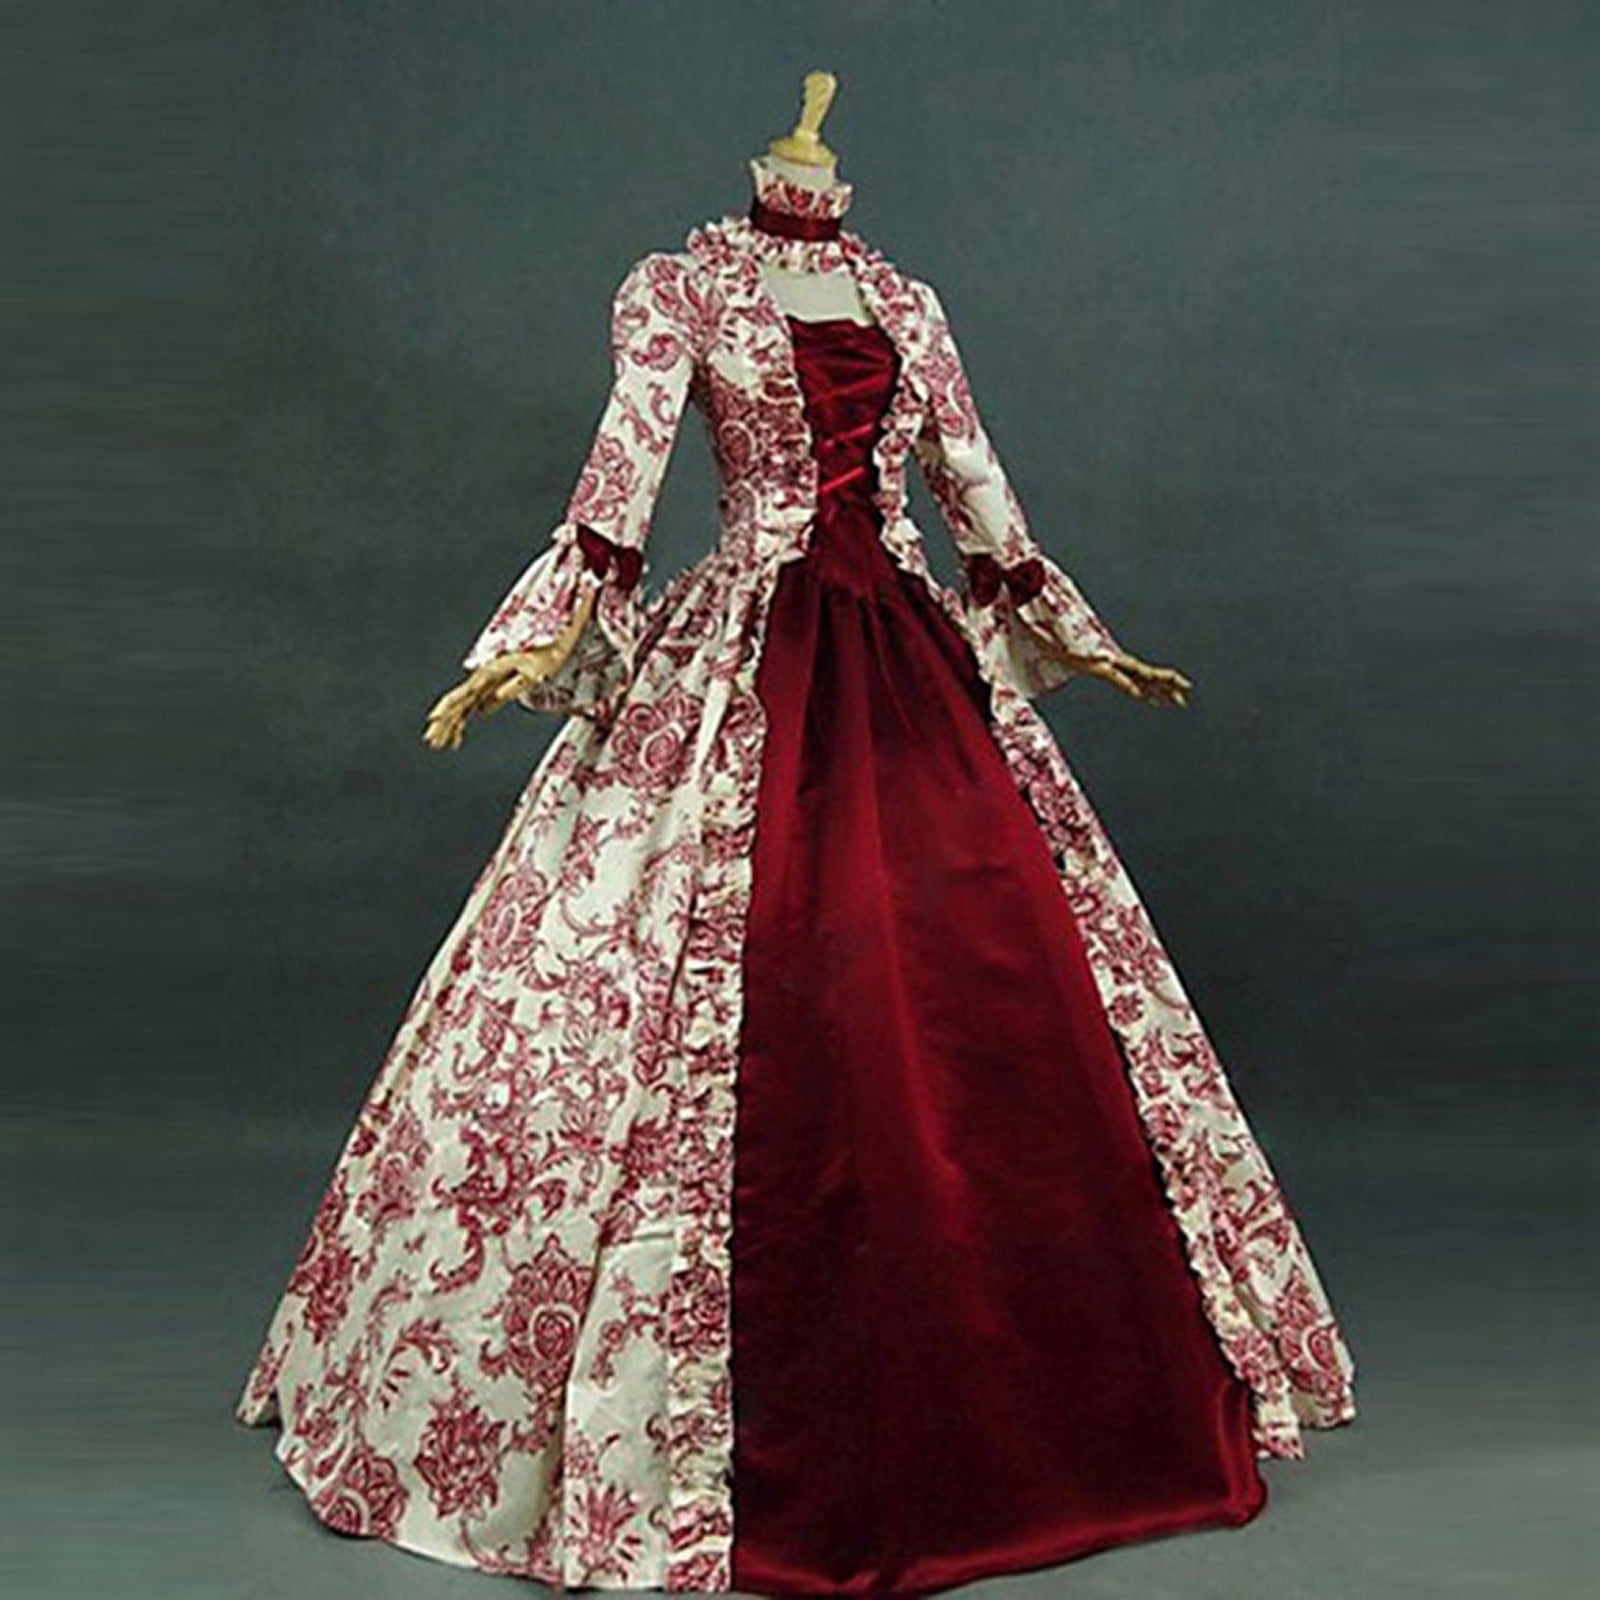 dress from 1800s